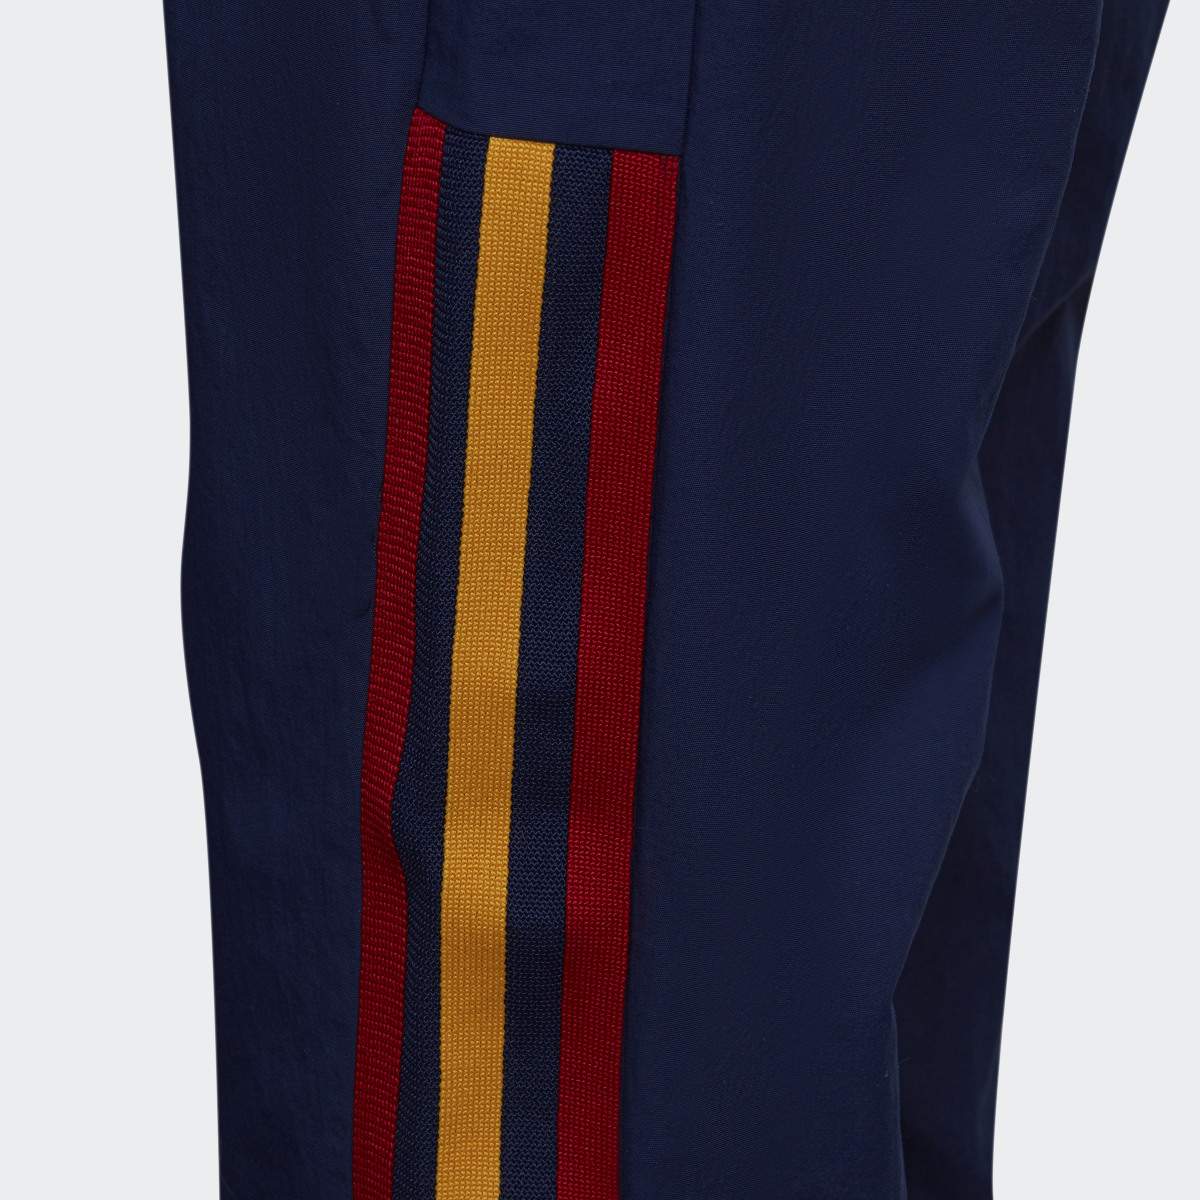 Adidas Spain Travel Tracksuit Bottoms. 5